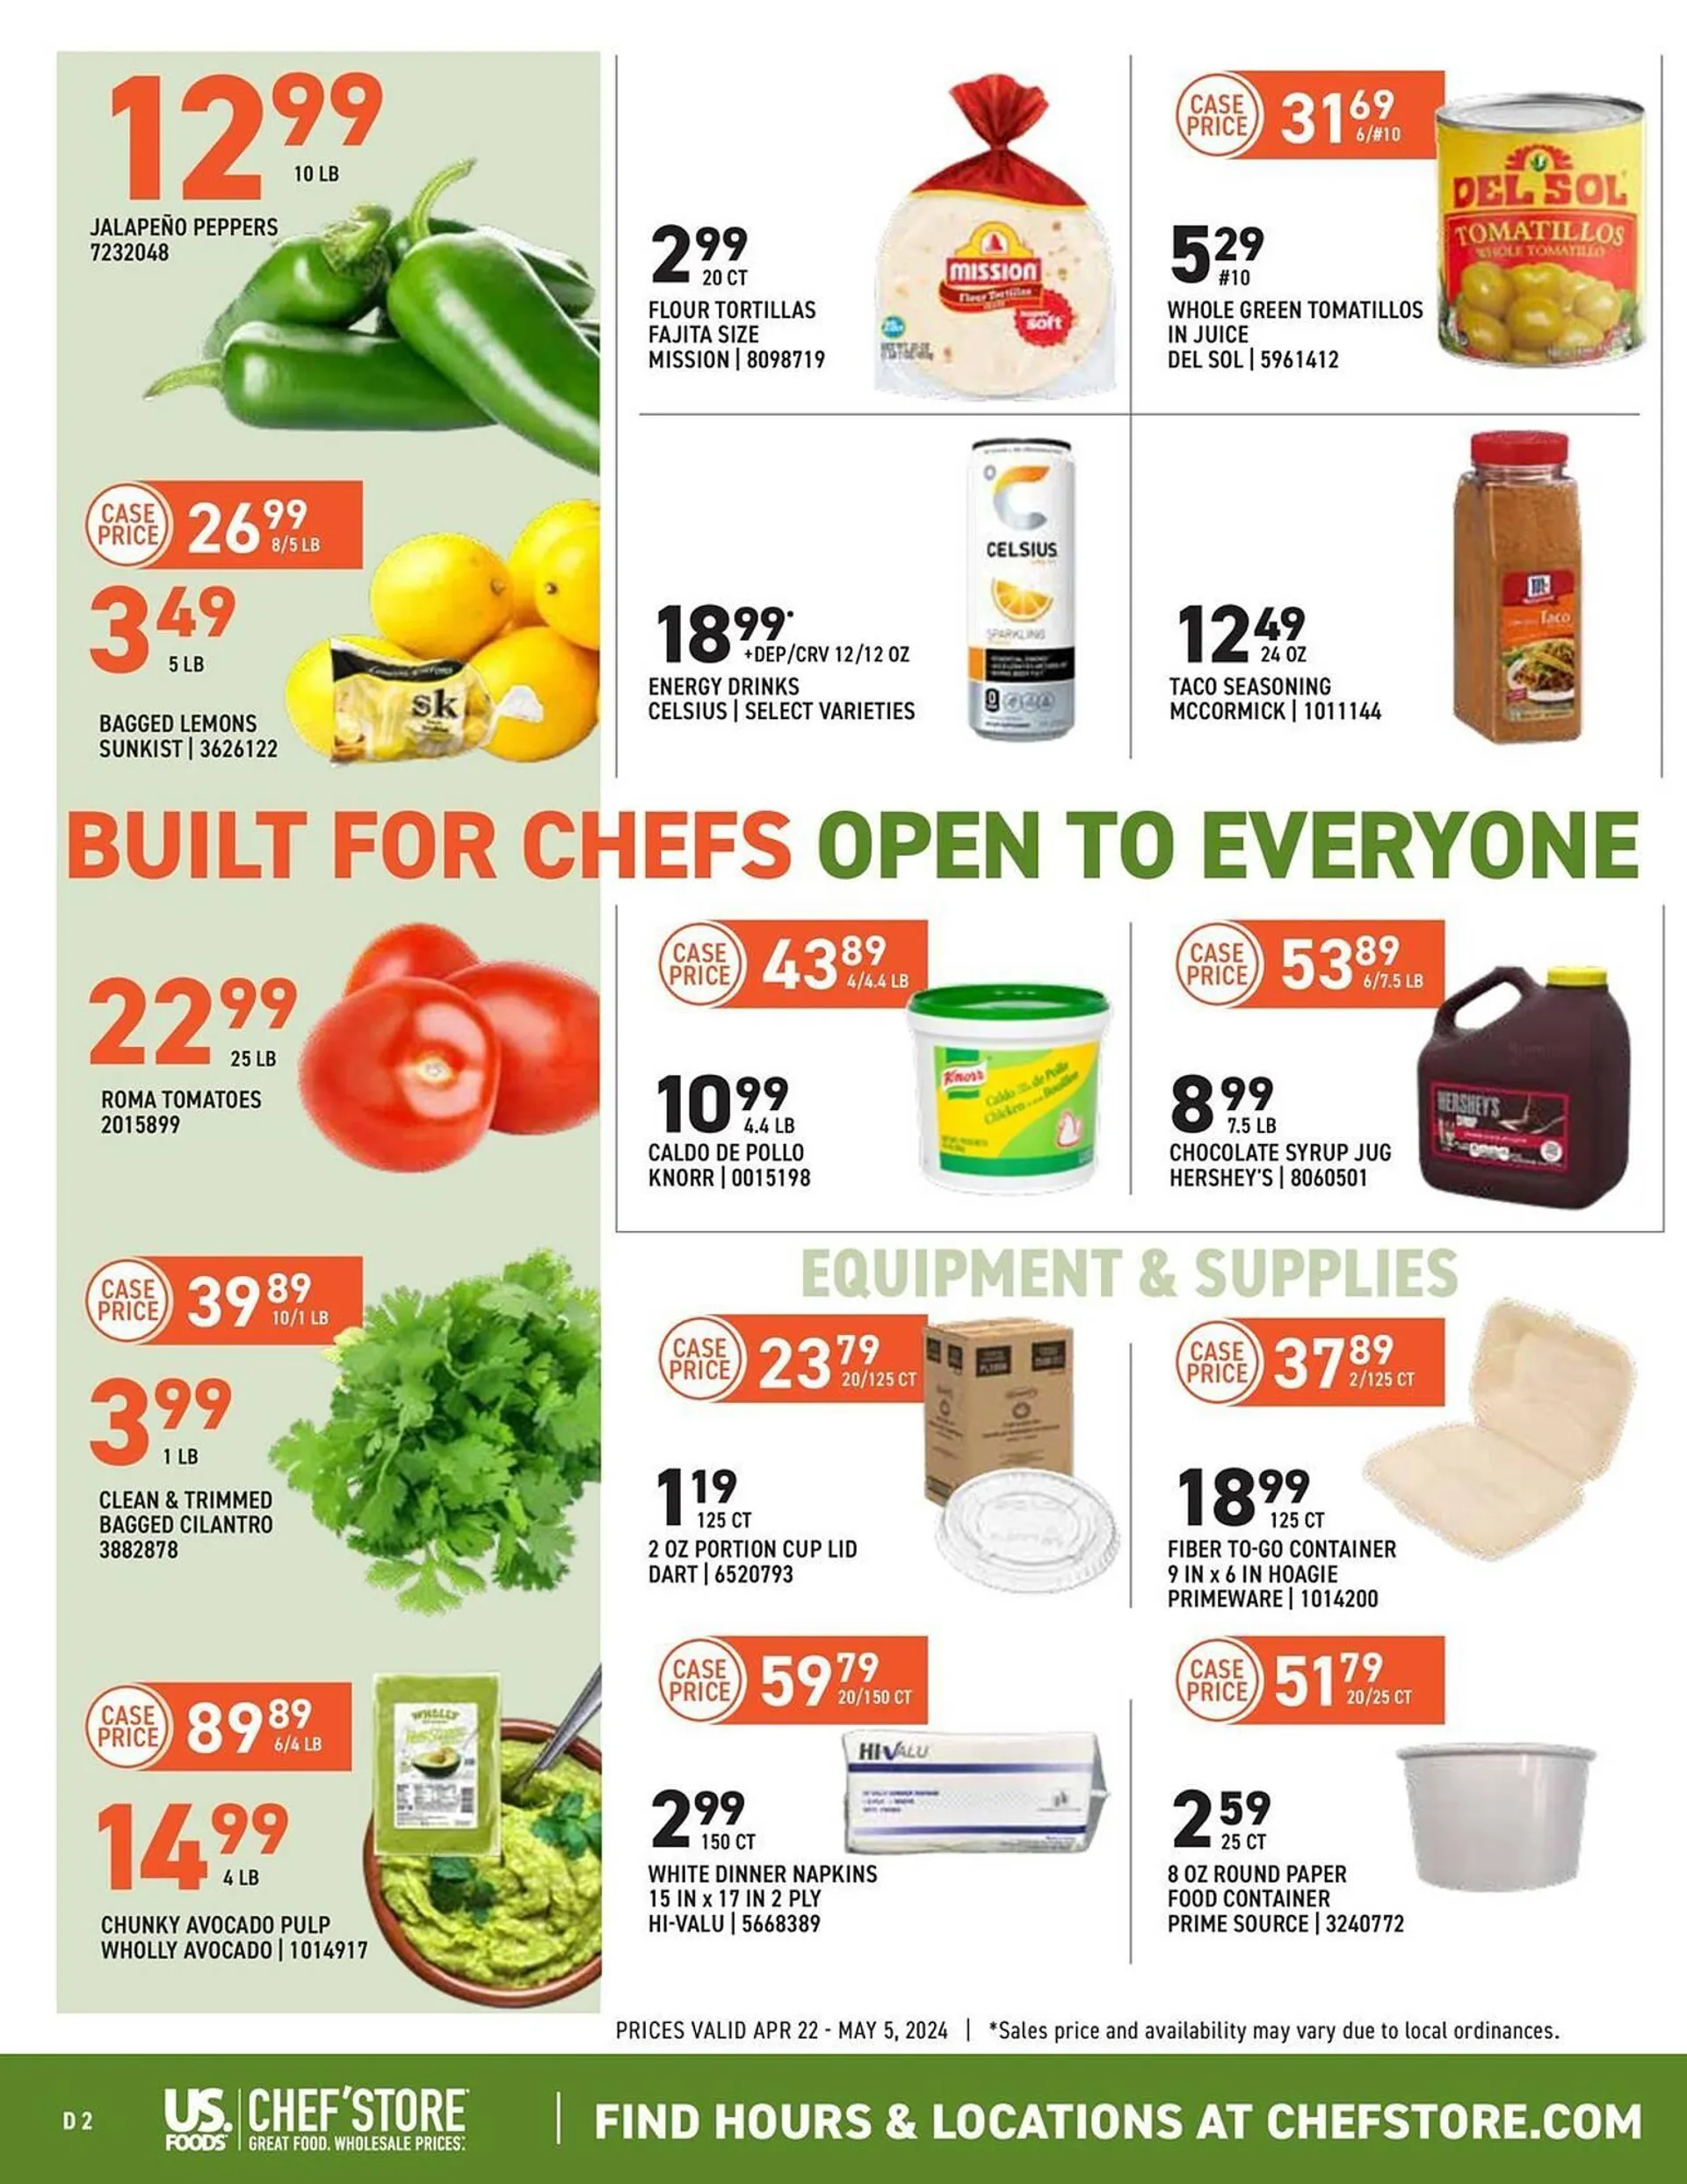 US Foods Chefs Store Weekly Ad - 2